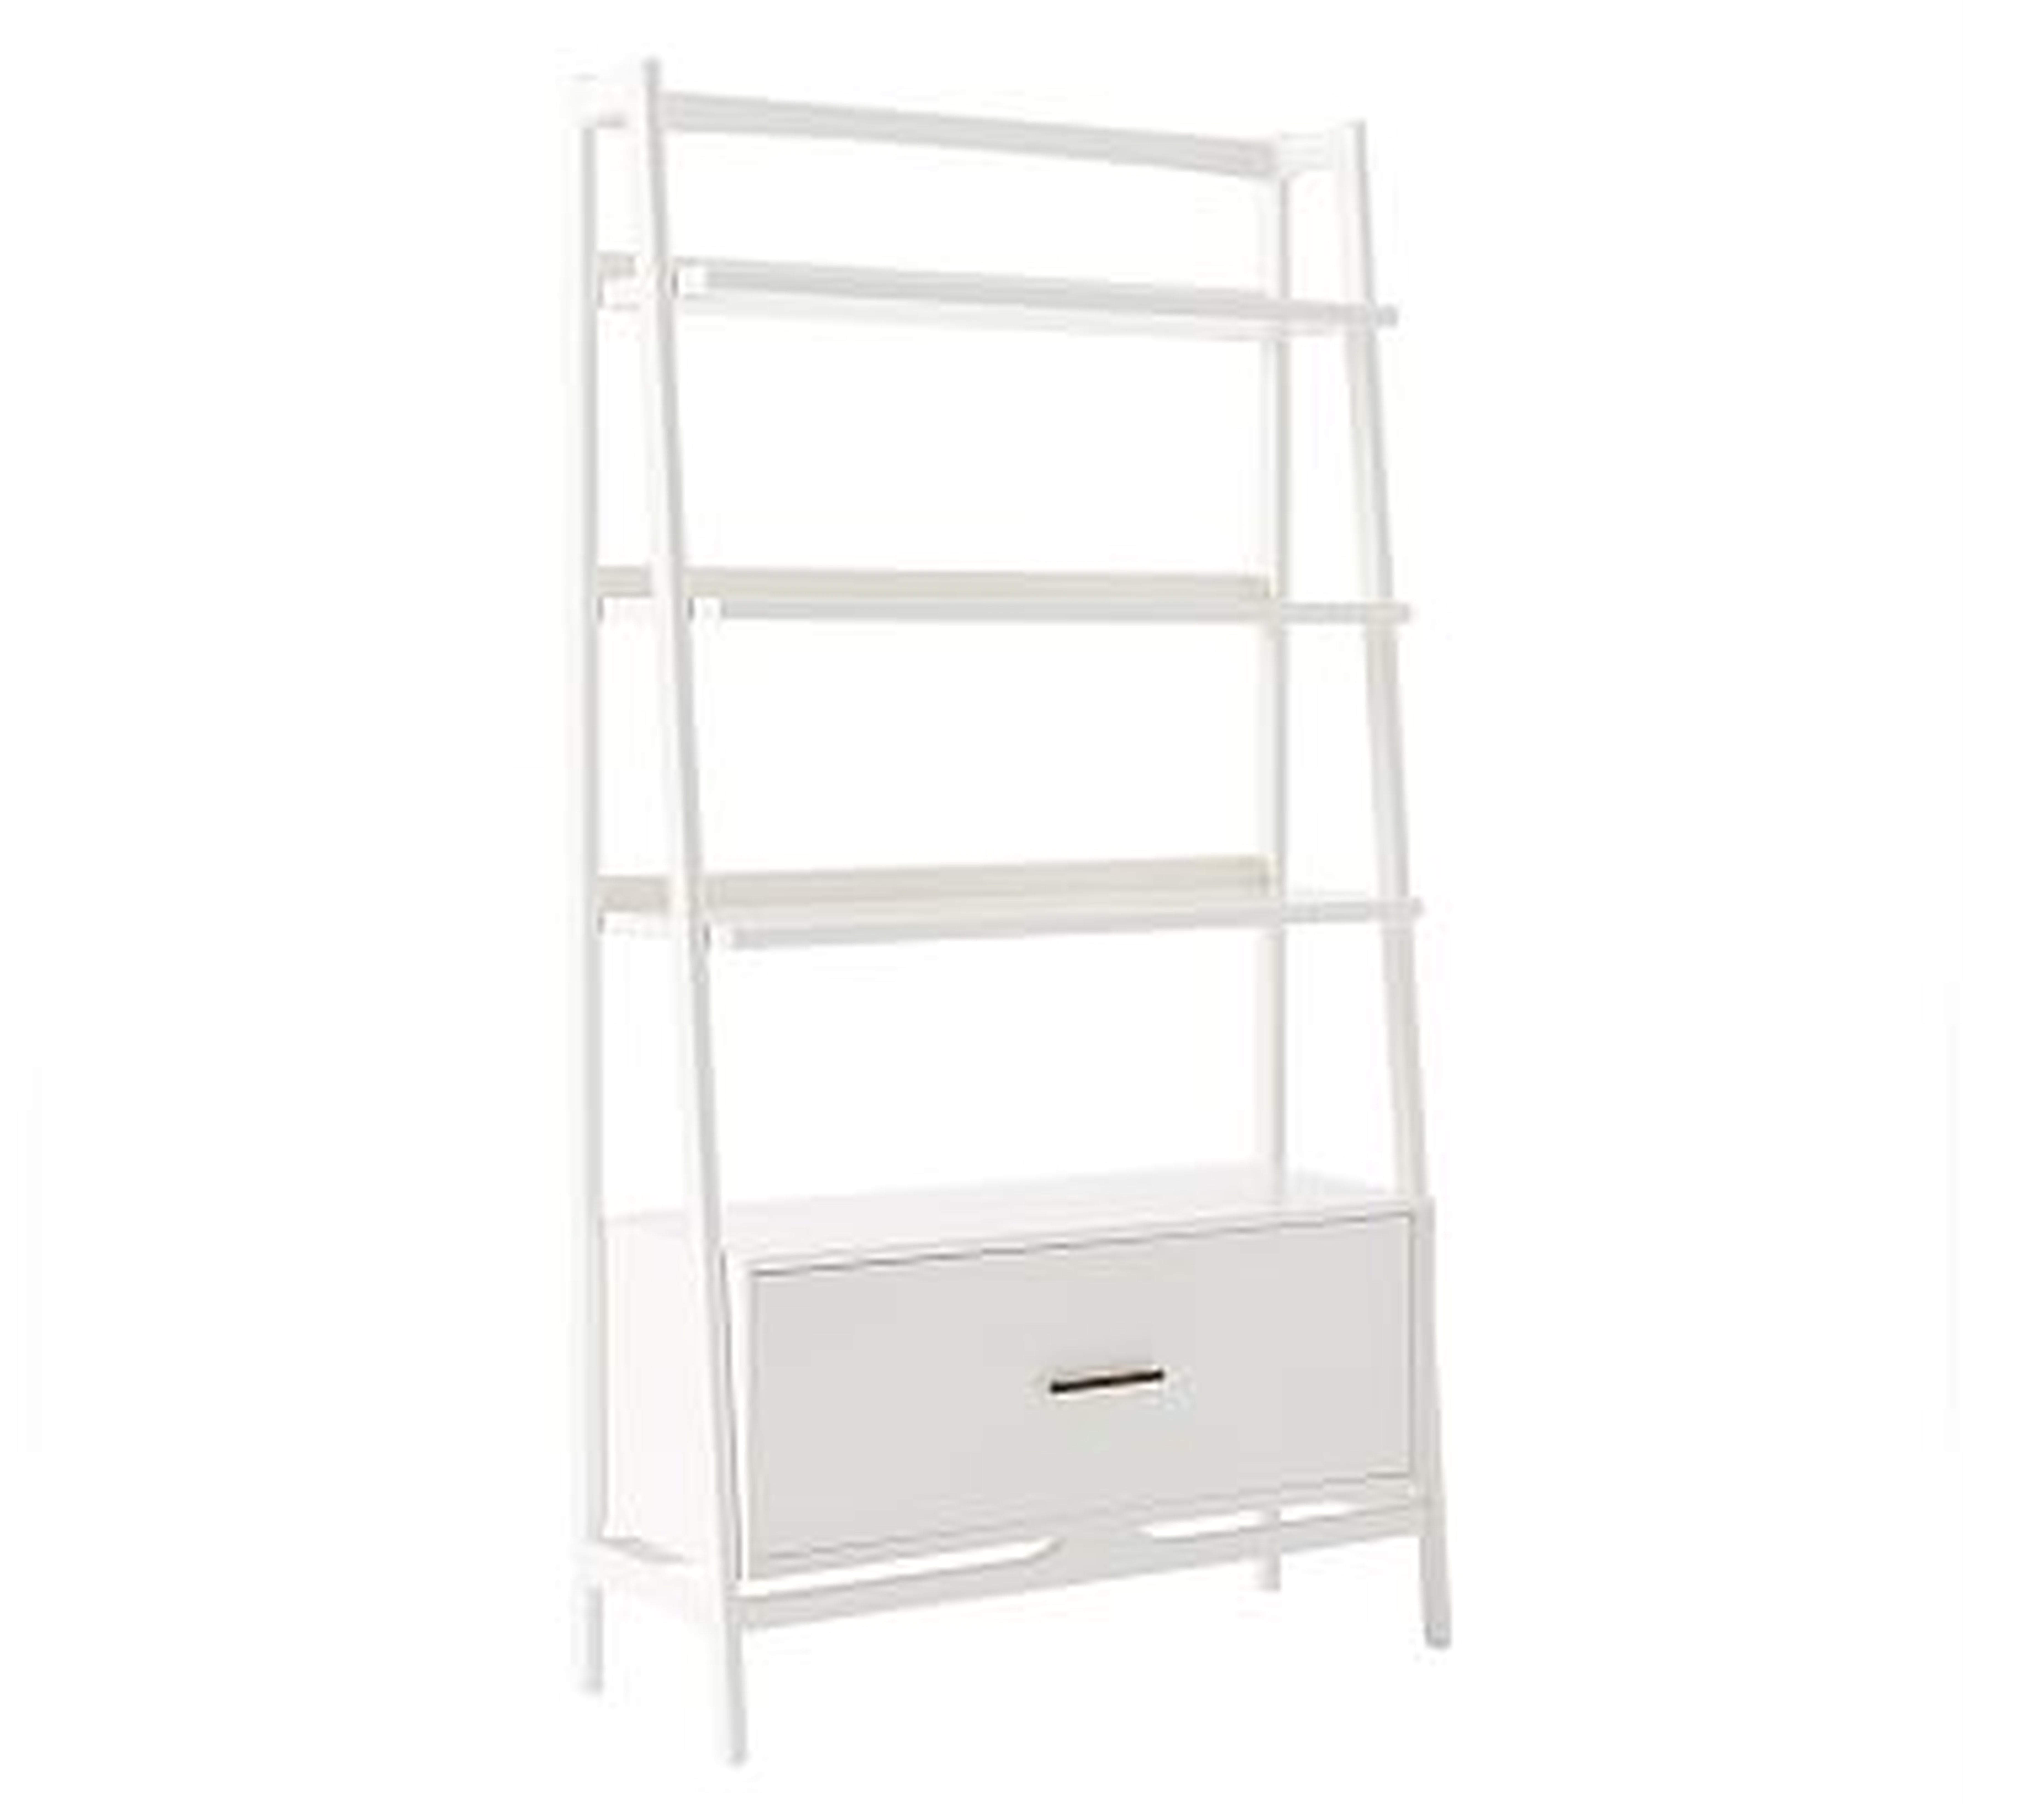 west elm x pbk Mid-Century Wide Tower Bookcase, White - Pottery Barn Kids